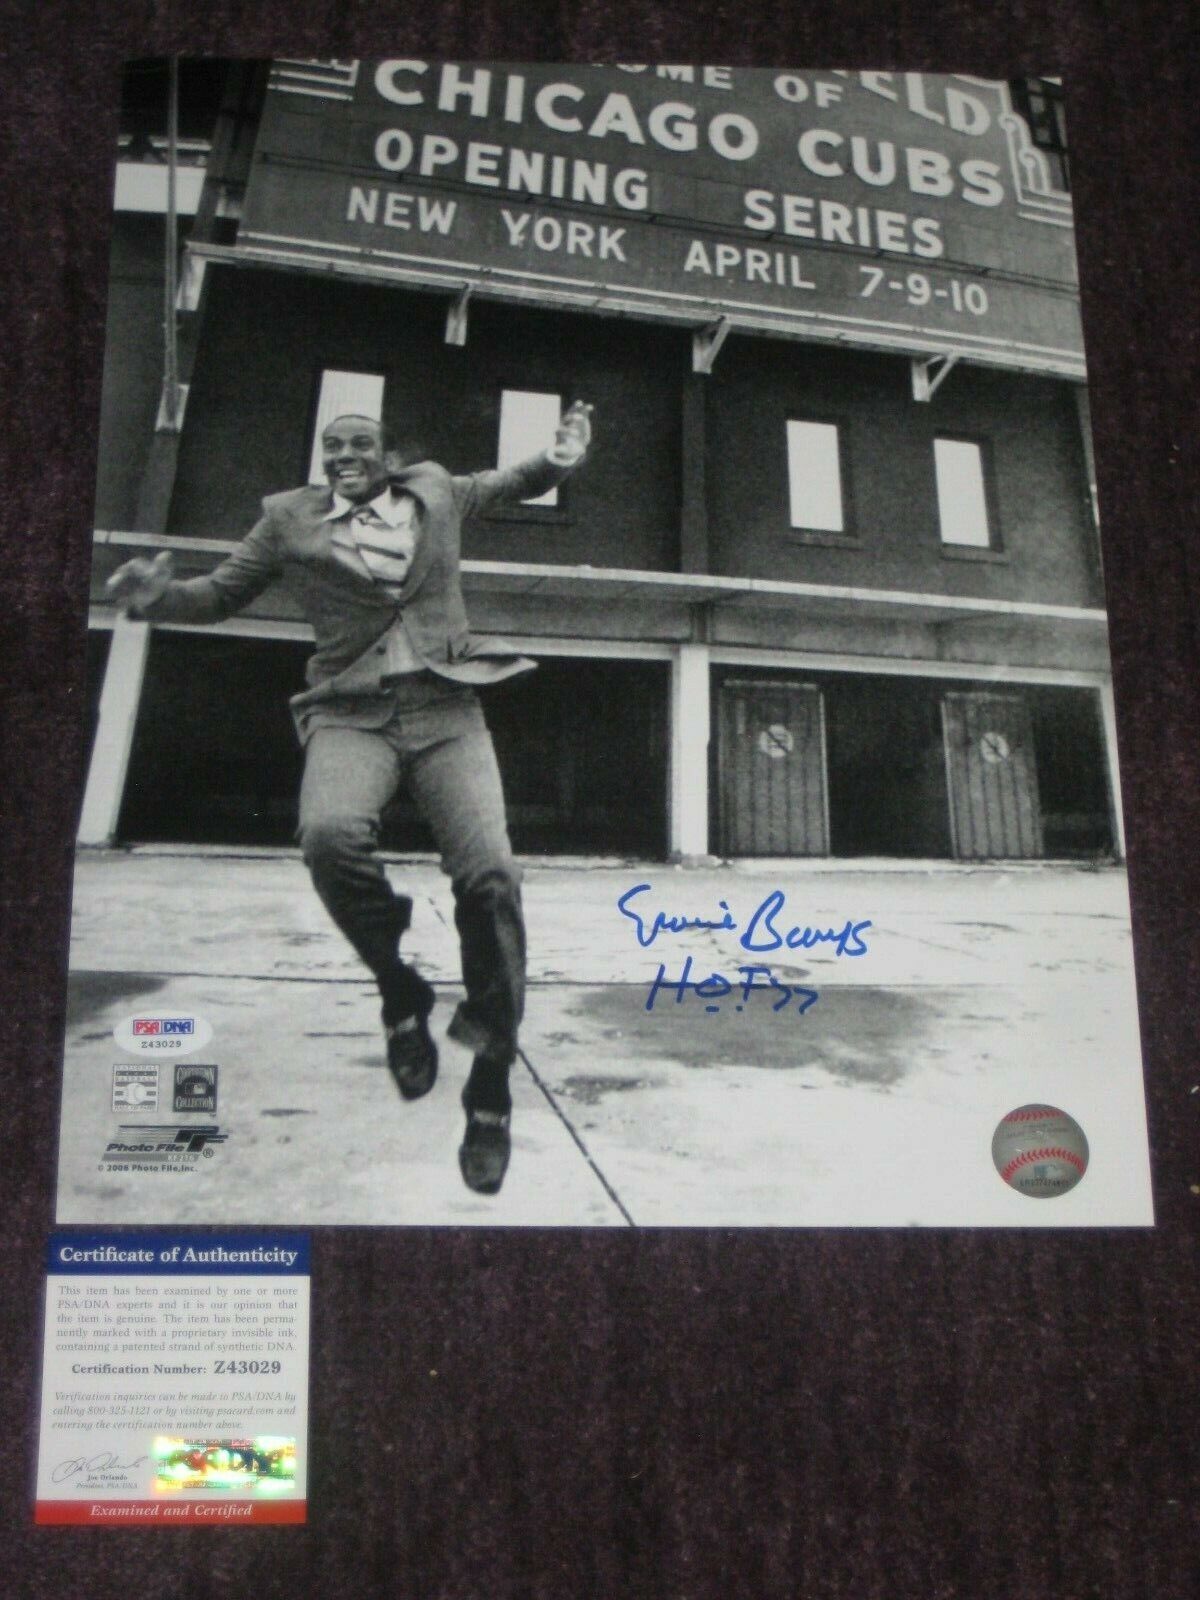 ERNIE BANKS Signed CUBS MARQUEE 11x14 Photo Poster painting w/ PSA COA & HOF Inscription